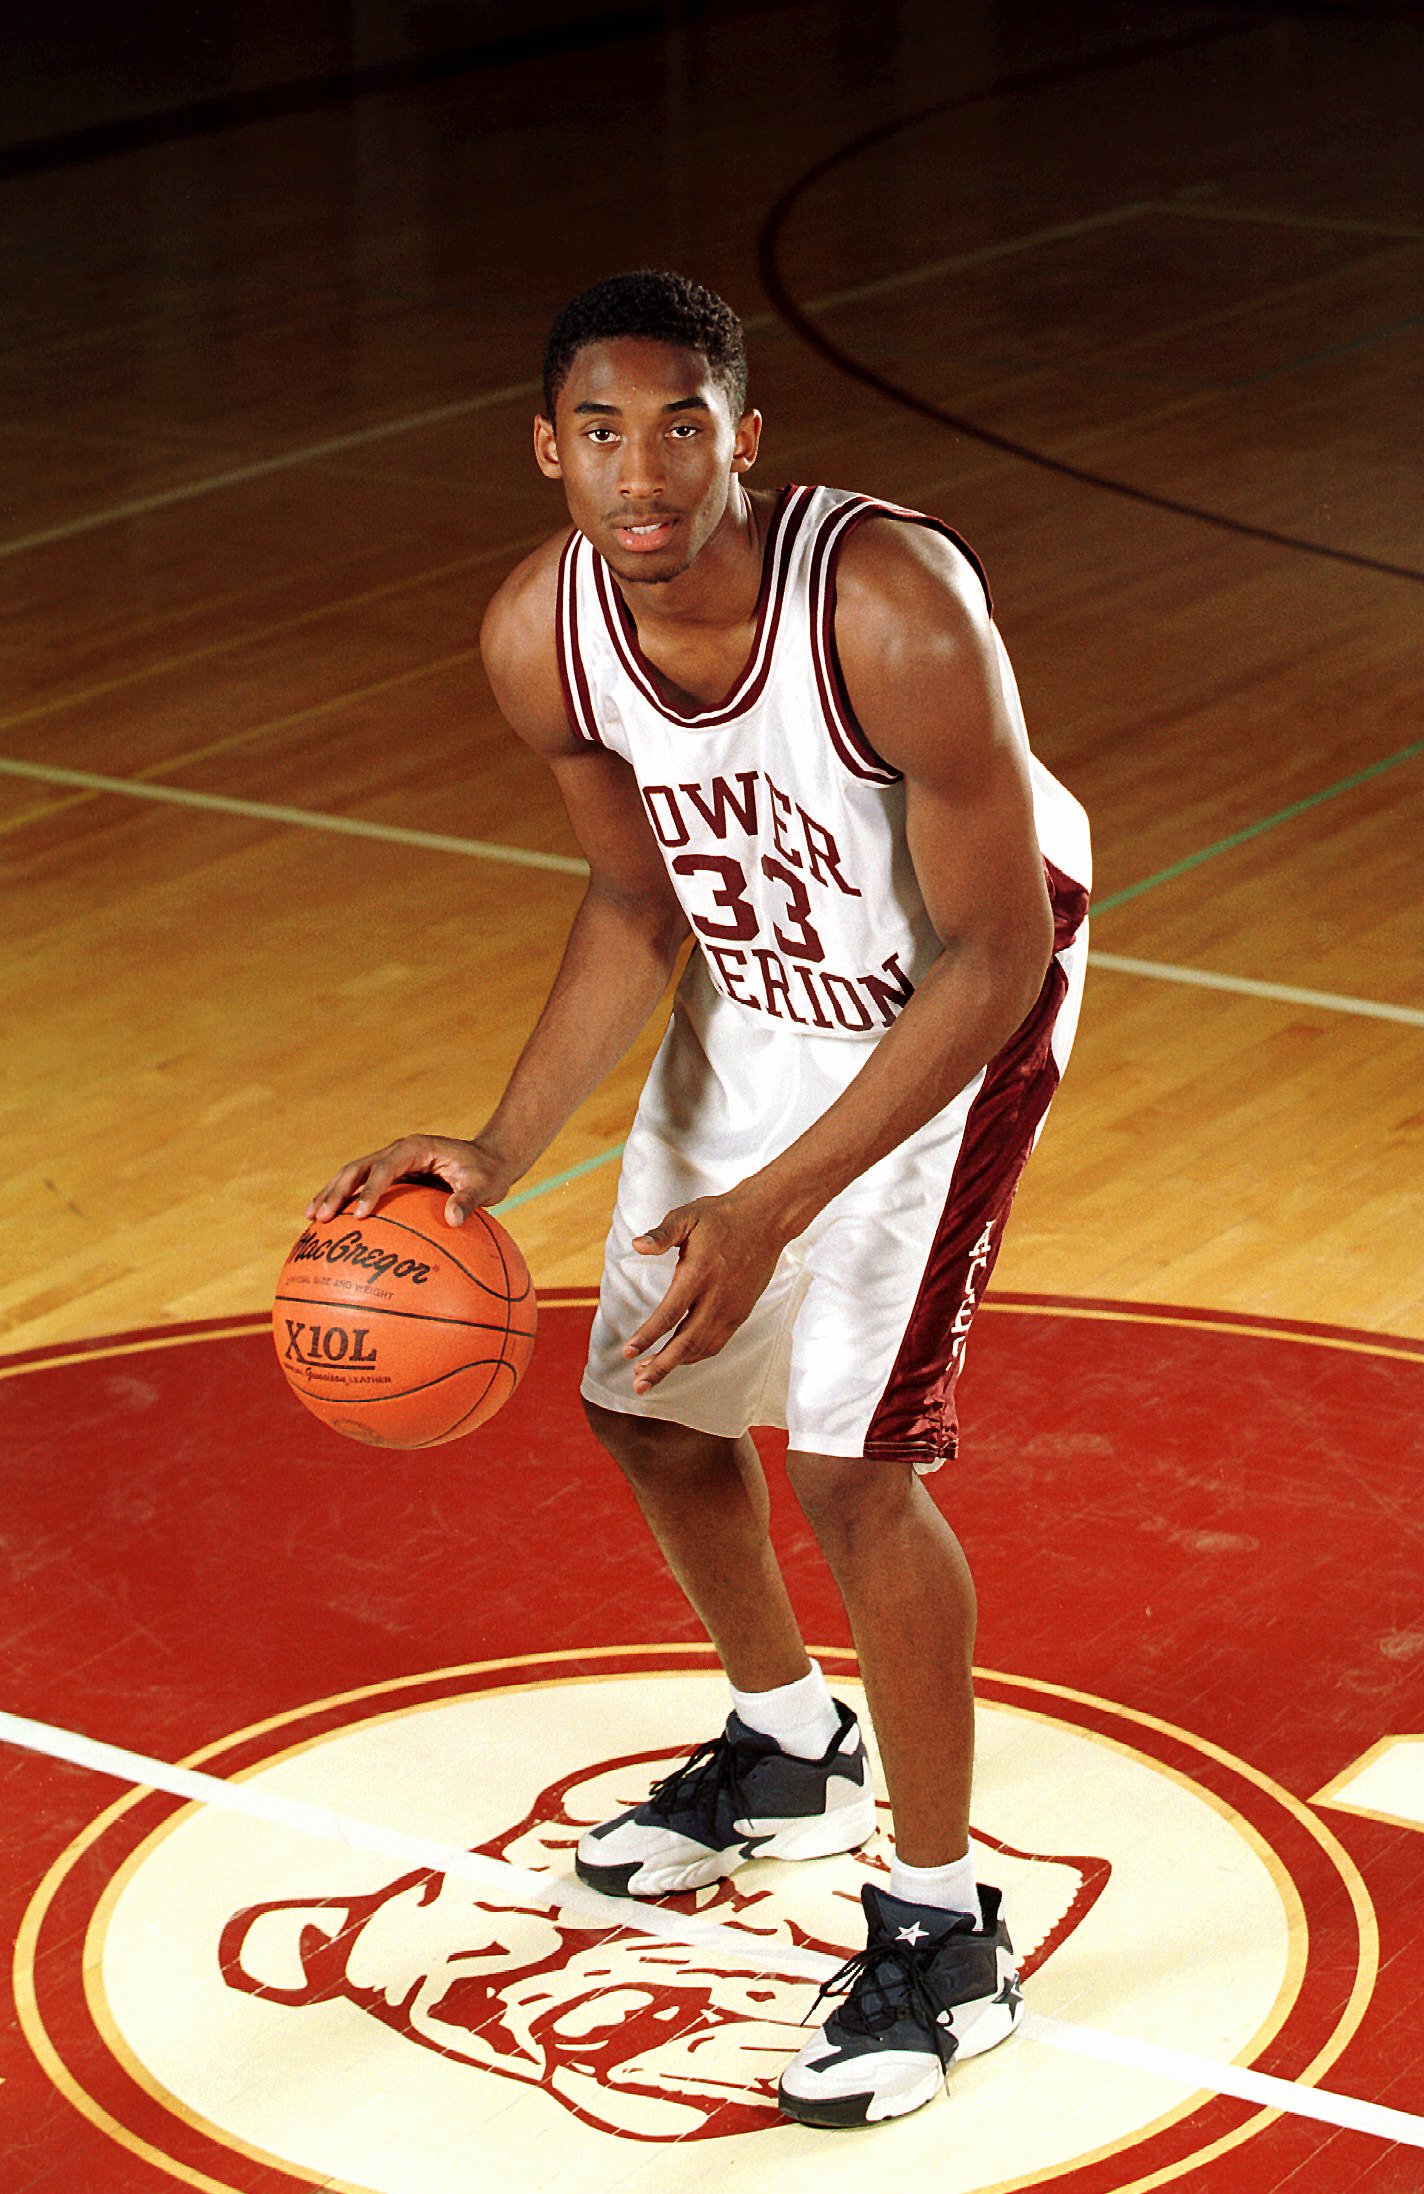 Game-Worn Kobe Bryant Lower Merion High School Jersey Up for